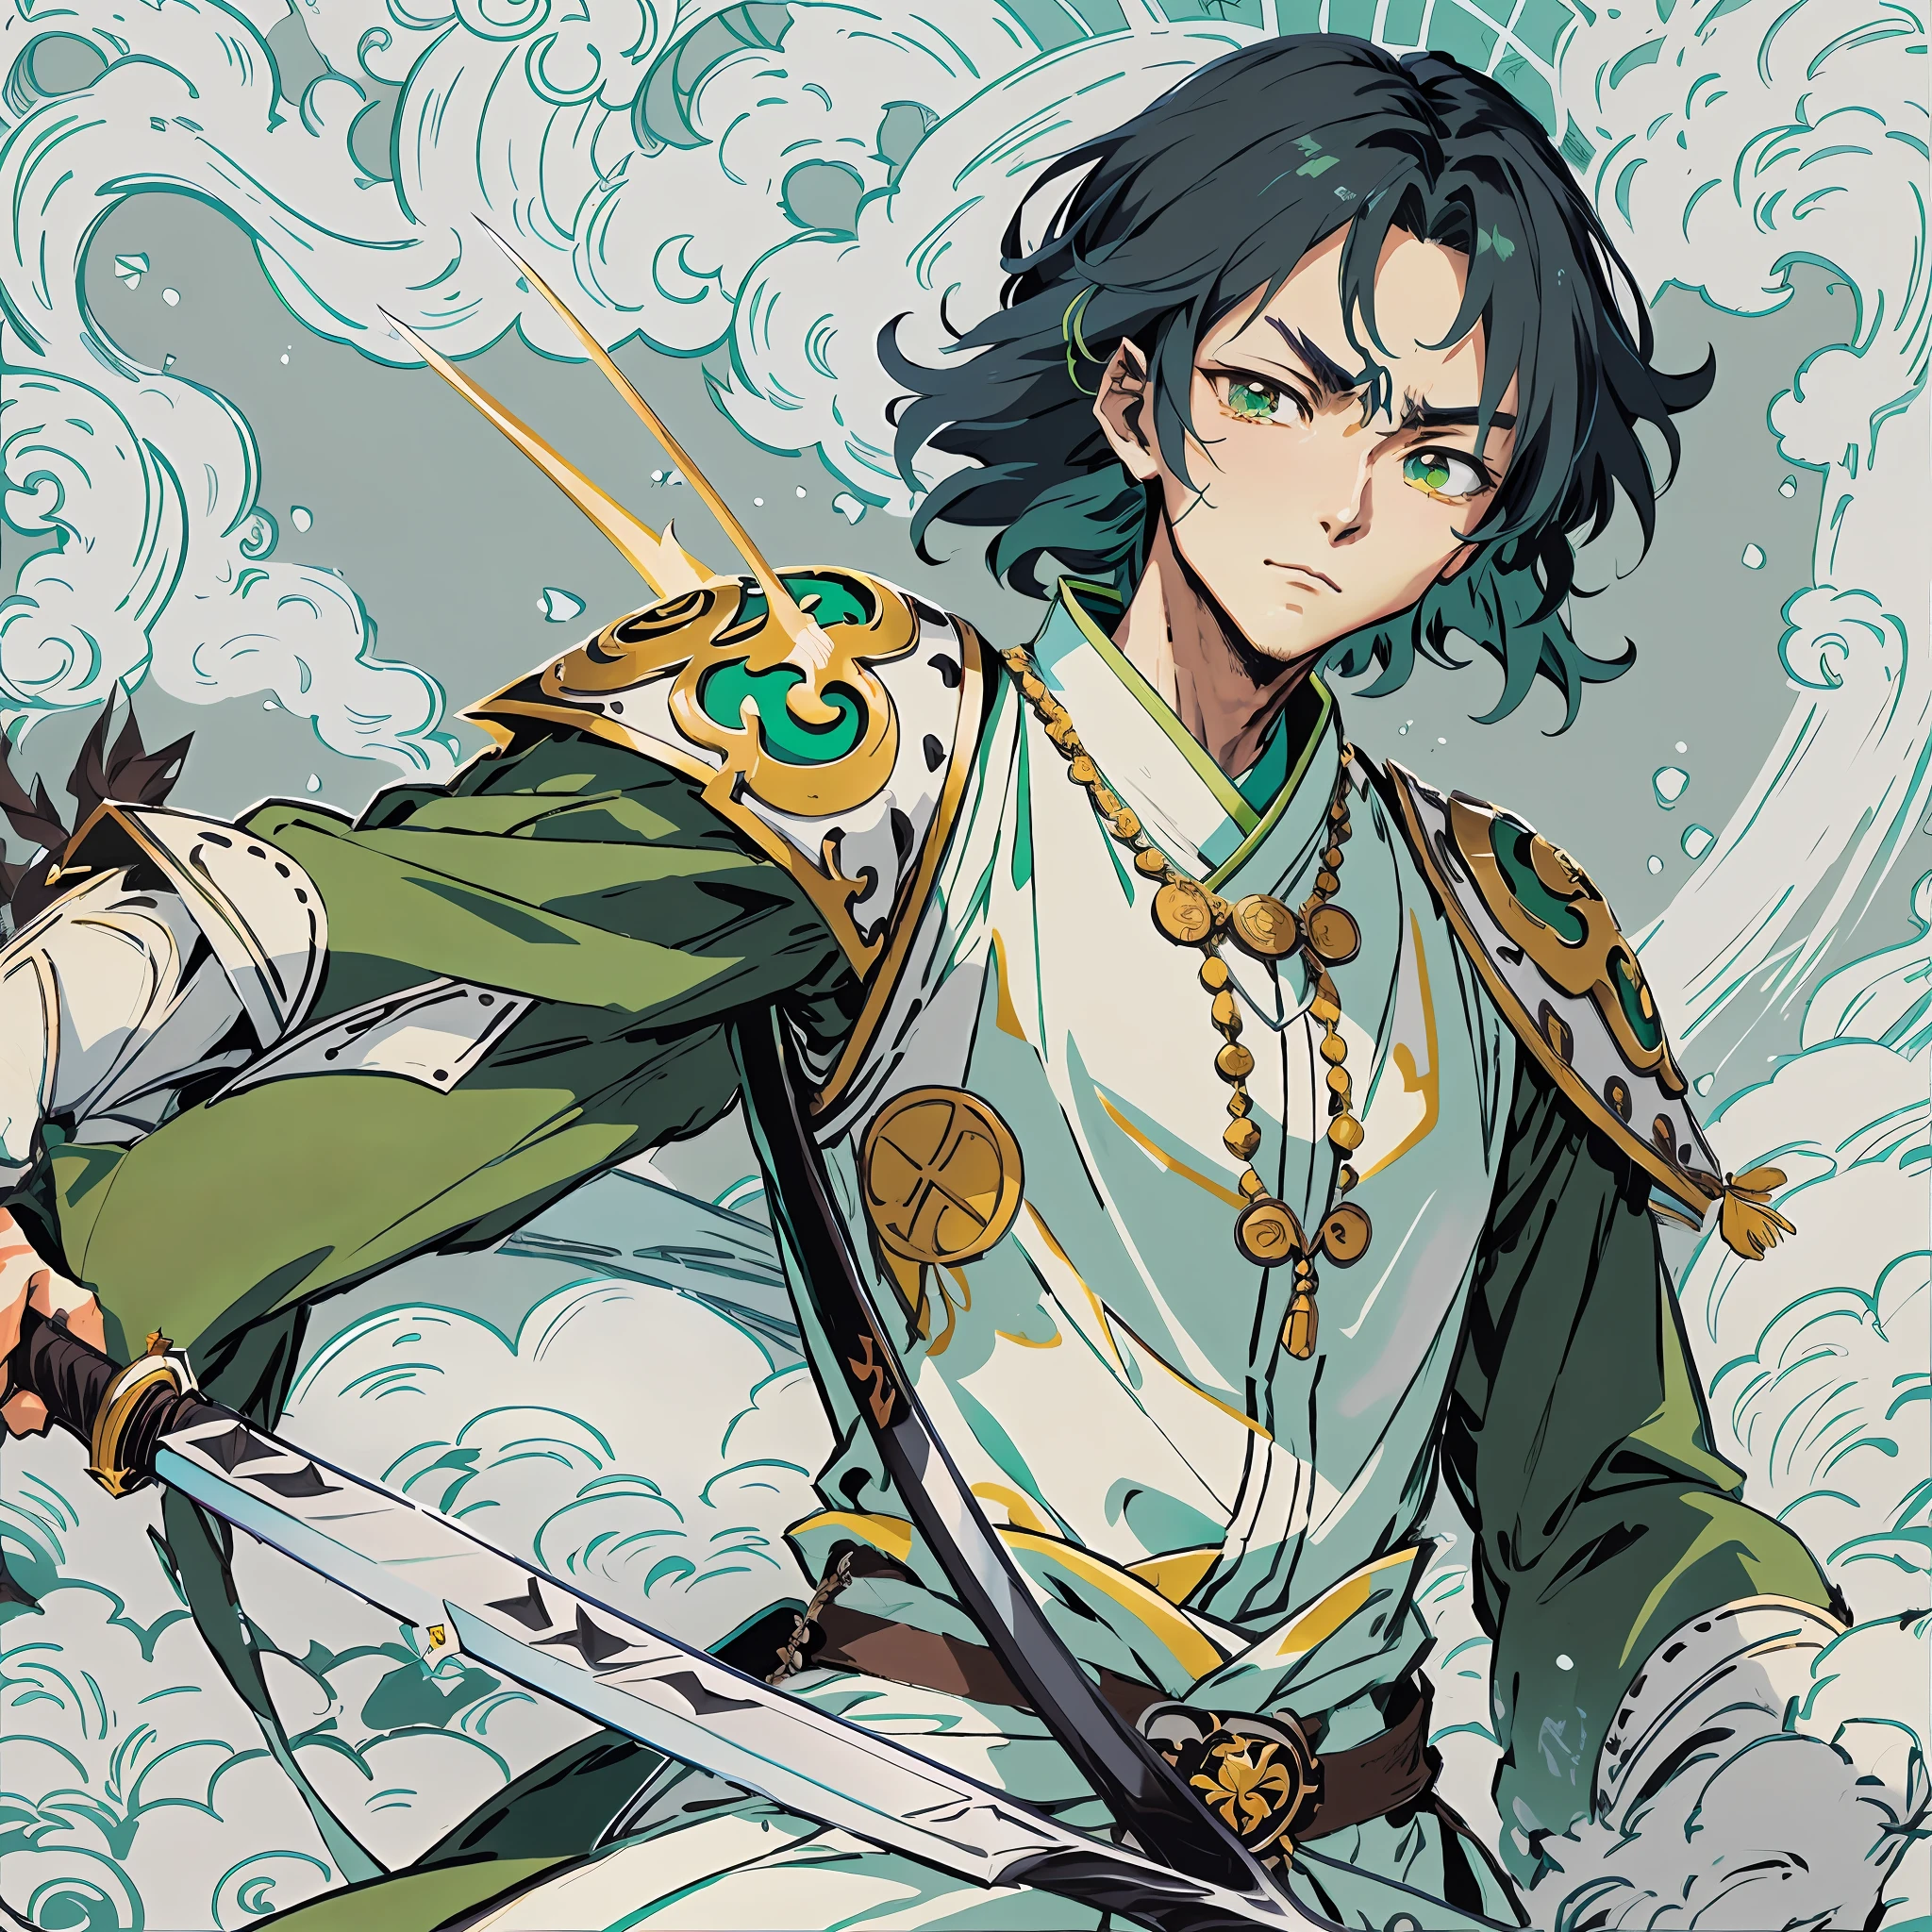 anime - style illustration of a man with a sword and a full body green outfit, cute face in demon slayer art, demon slayer rui fanart, demon slayer artstyle, highly detailed official art, exquisite highly detailed fanart, official art, shigenori soejima illustration, beautiful androgynous prince, detailed anime character art, zhao yun, keqing of genshin impact